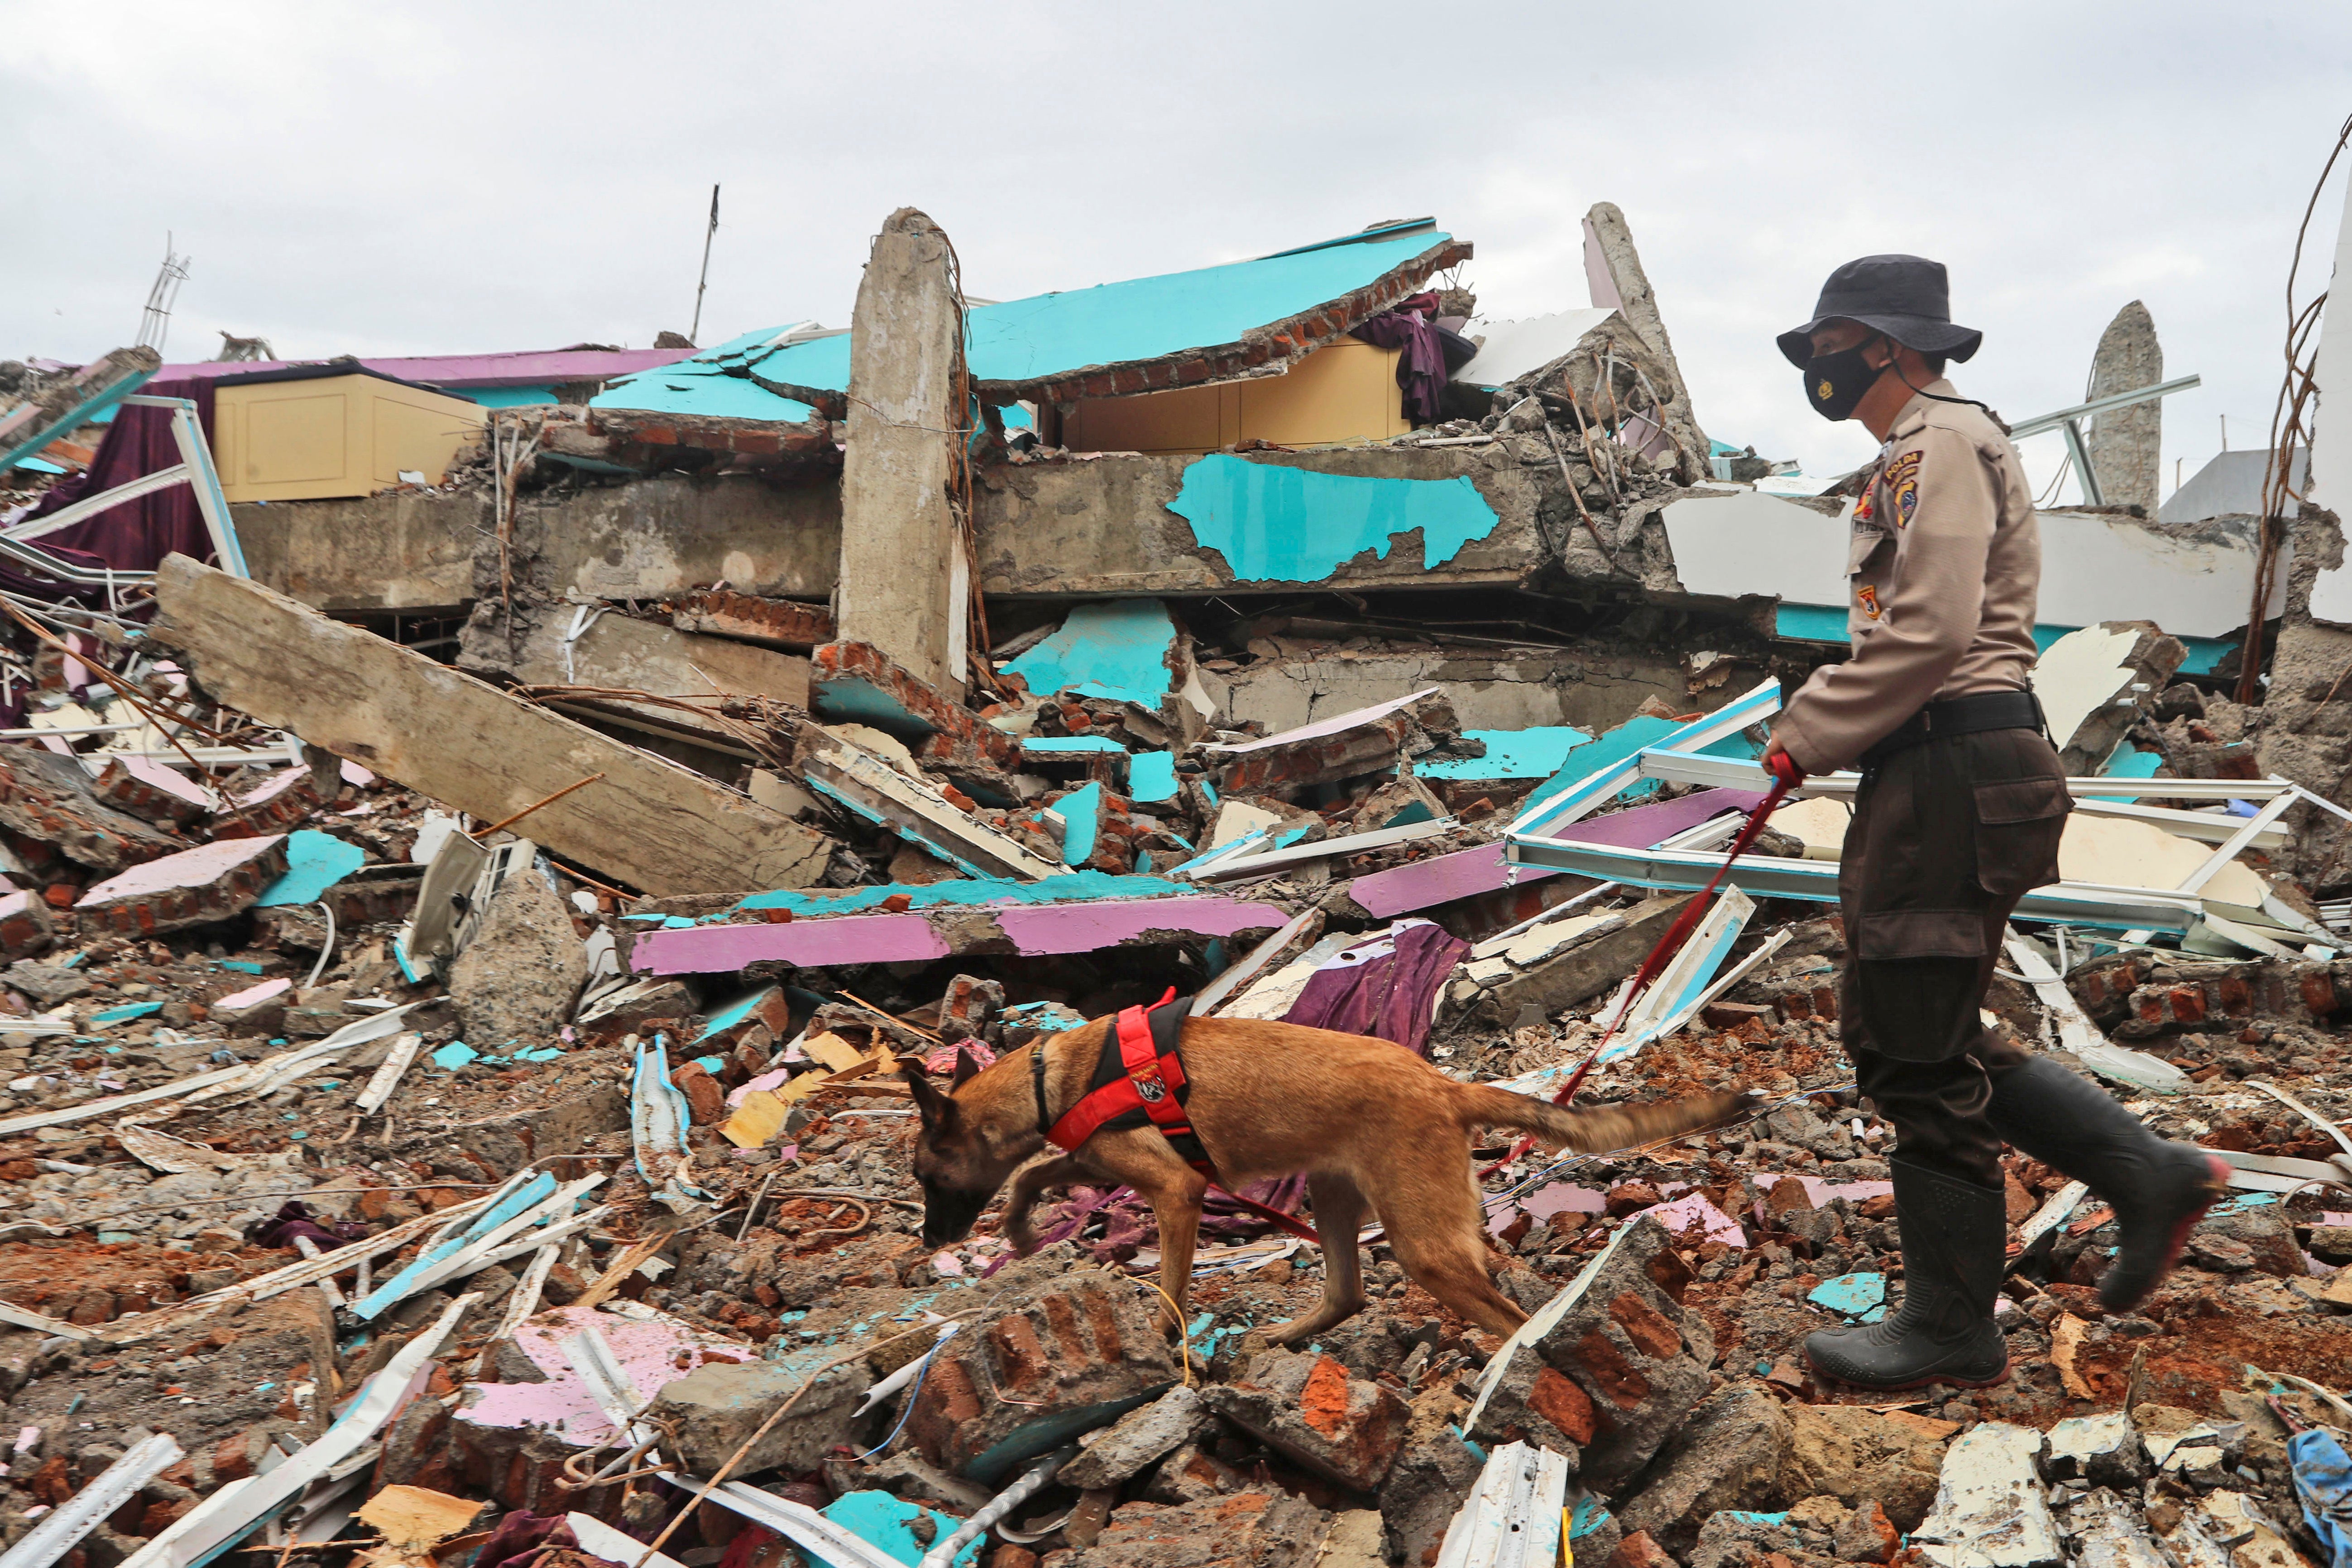 A police officer leads a sniffer dog during a search for victims at the ruin of a building flattened by an earthquake in Mamuju, Indonesia,